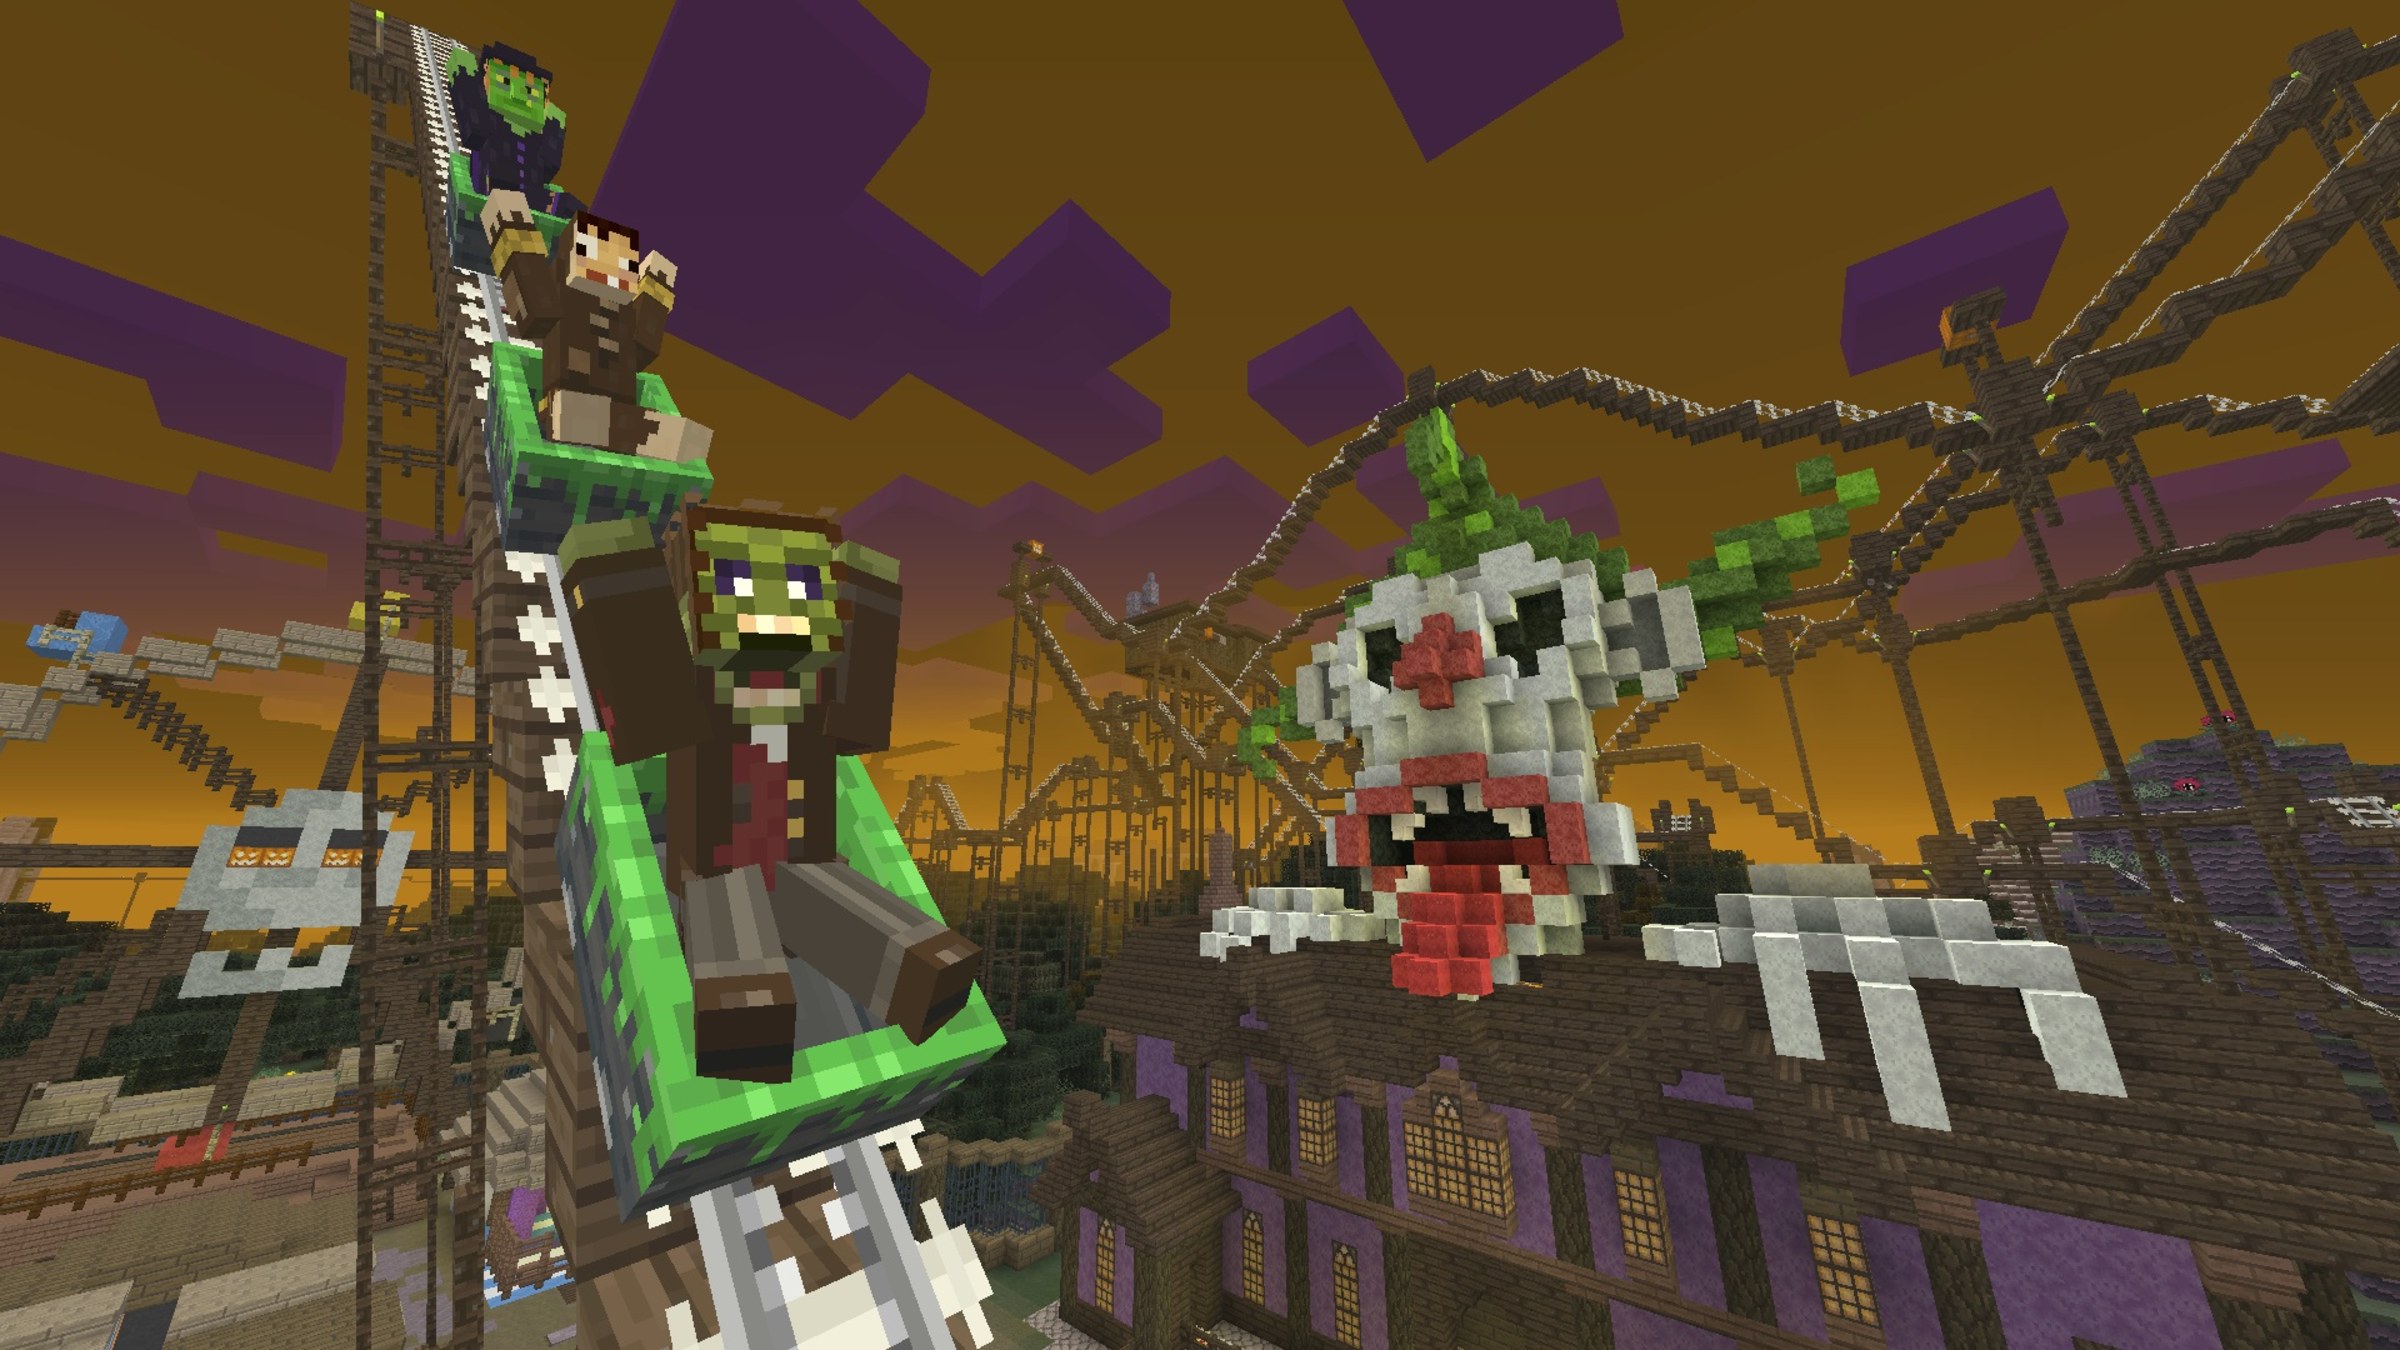 What happens in Minecraft during Halloween?